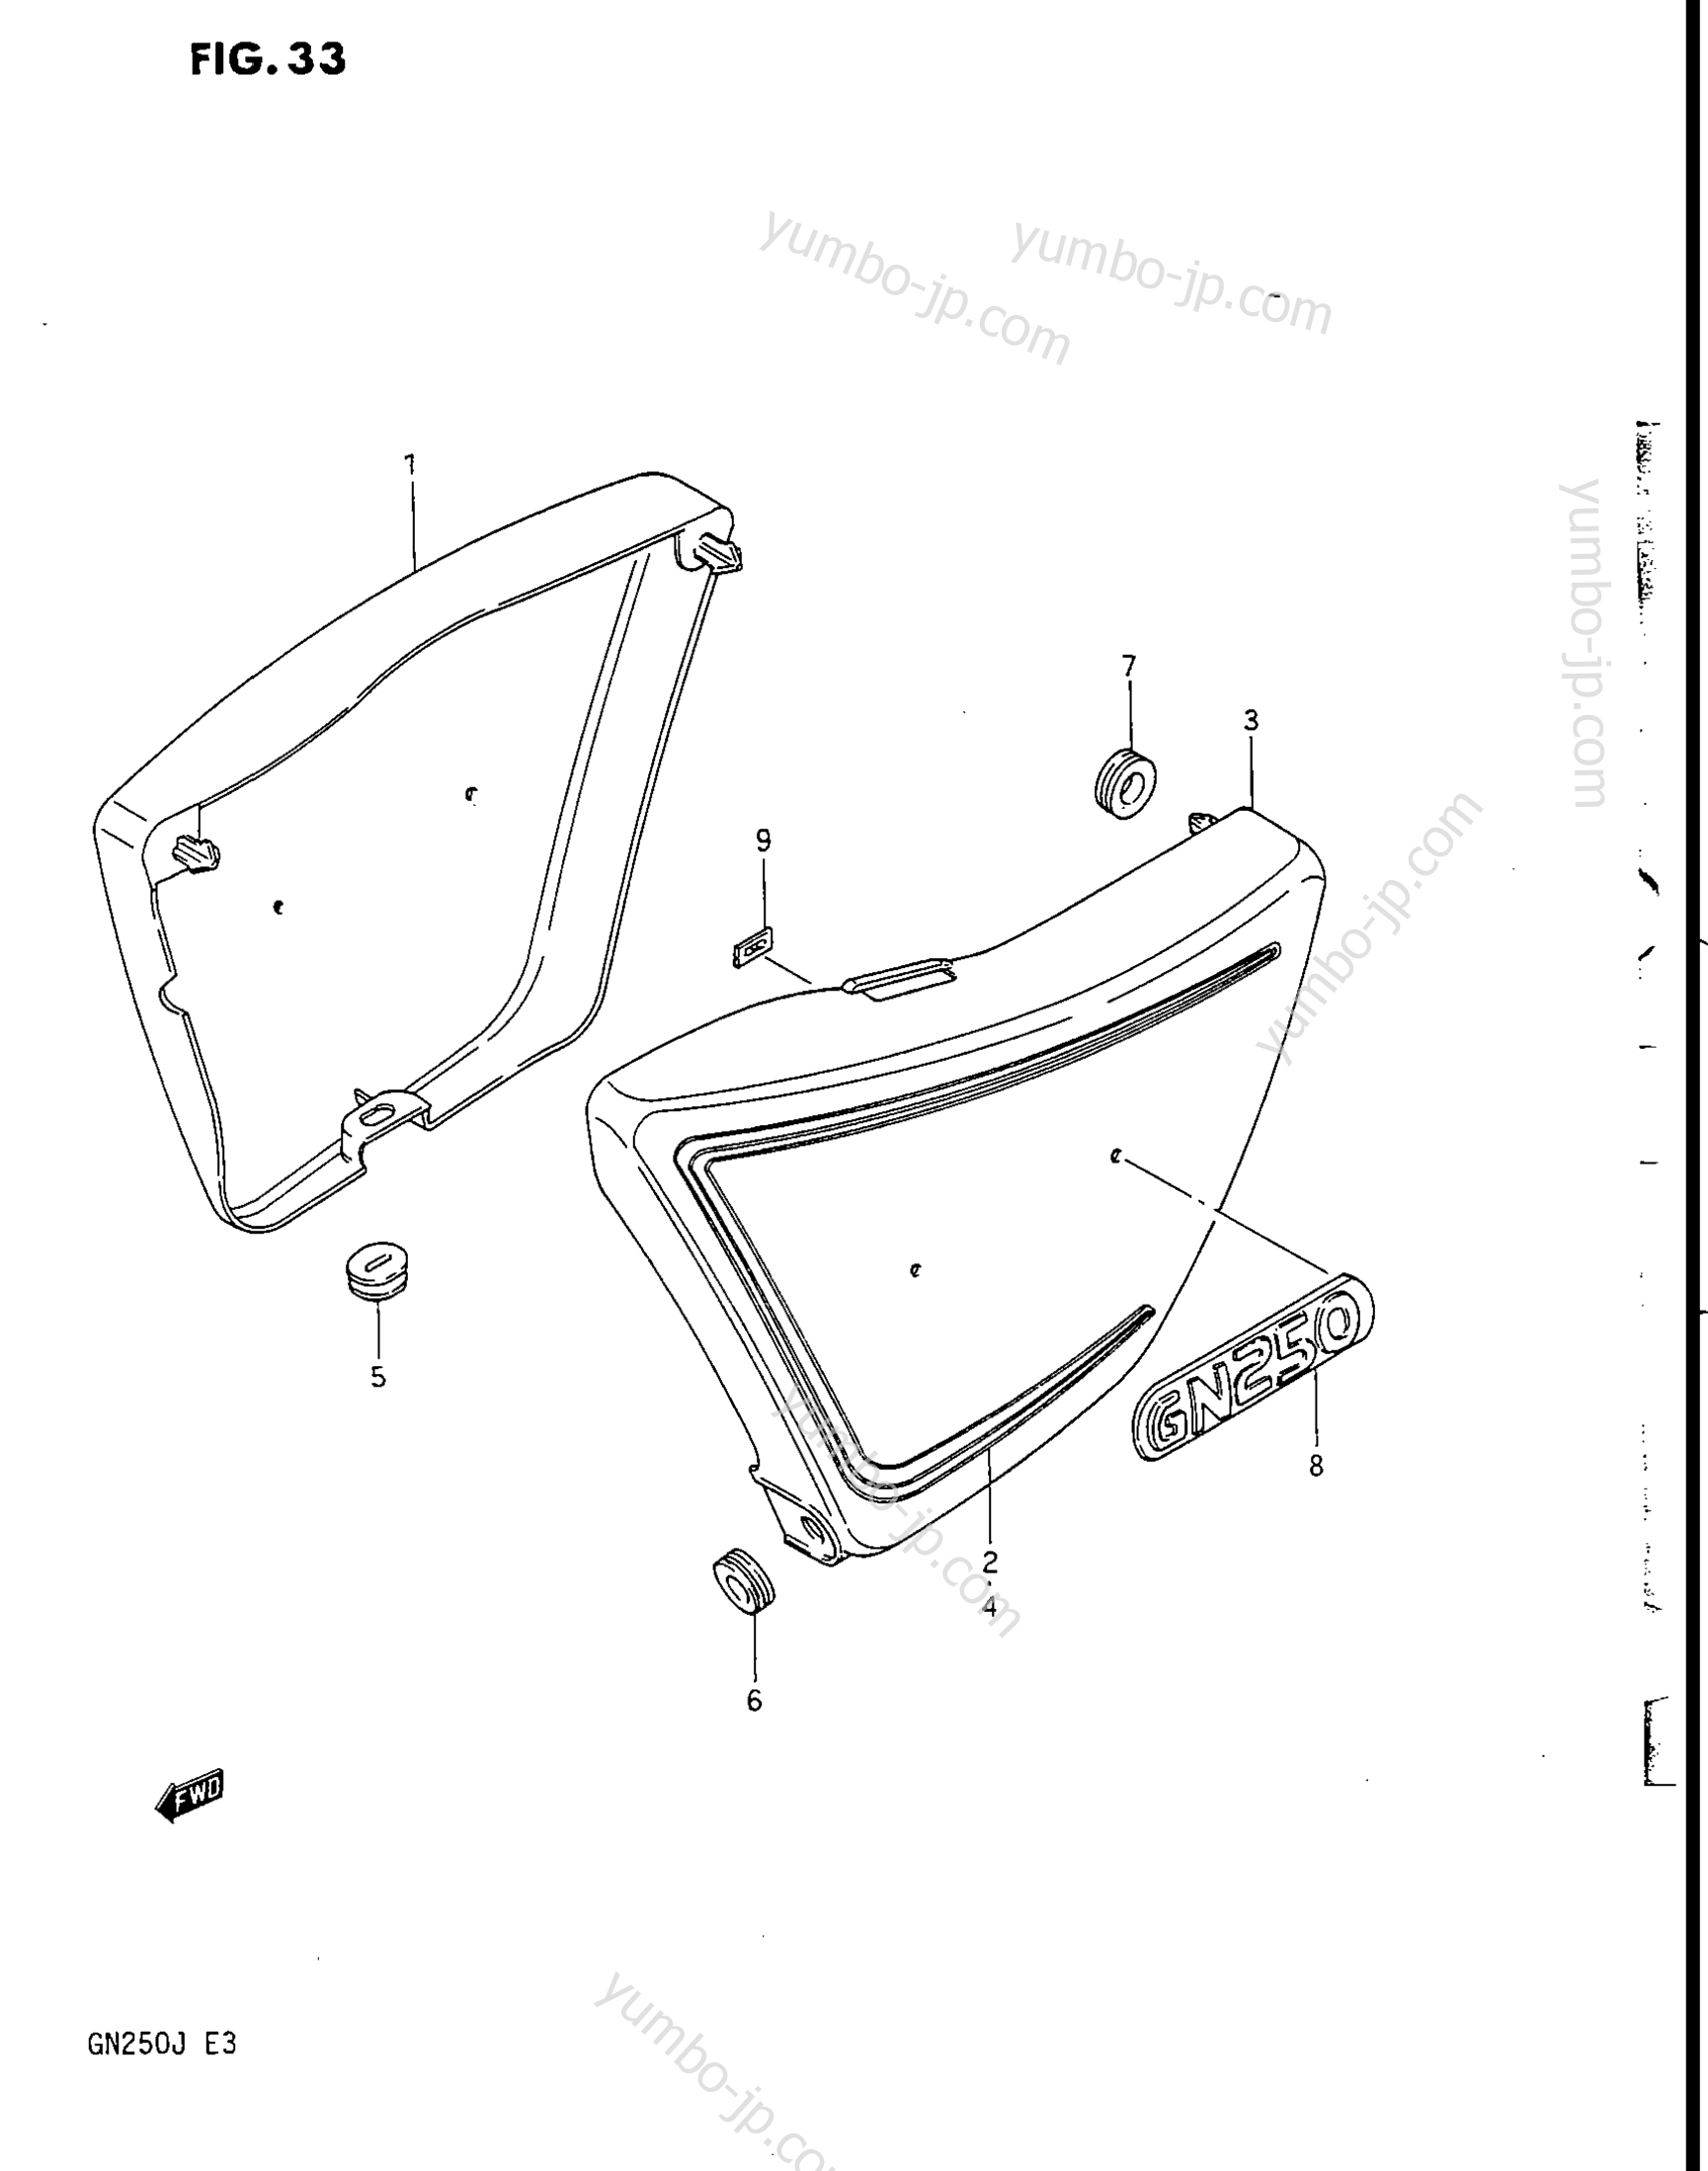 FRAME COVER for motorcycles SUZUKI 1985, (GN250) 1988 year